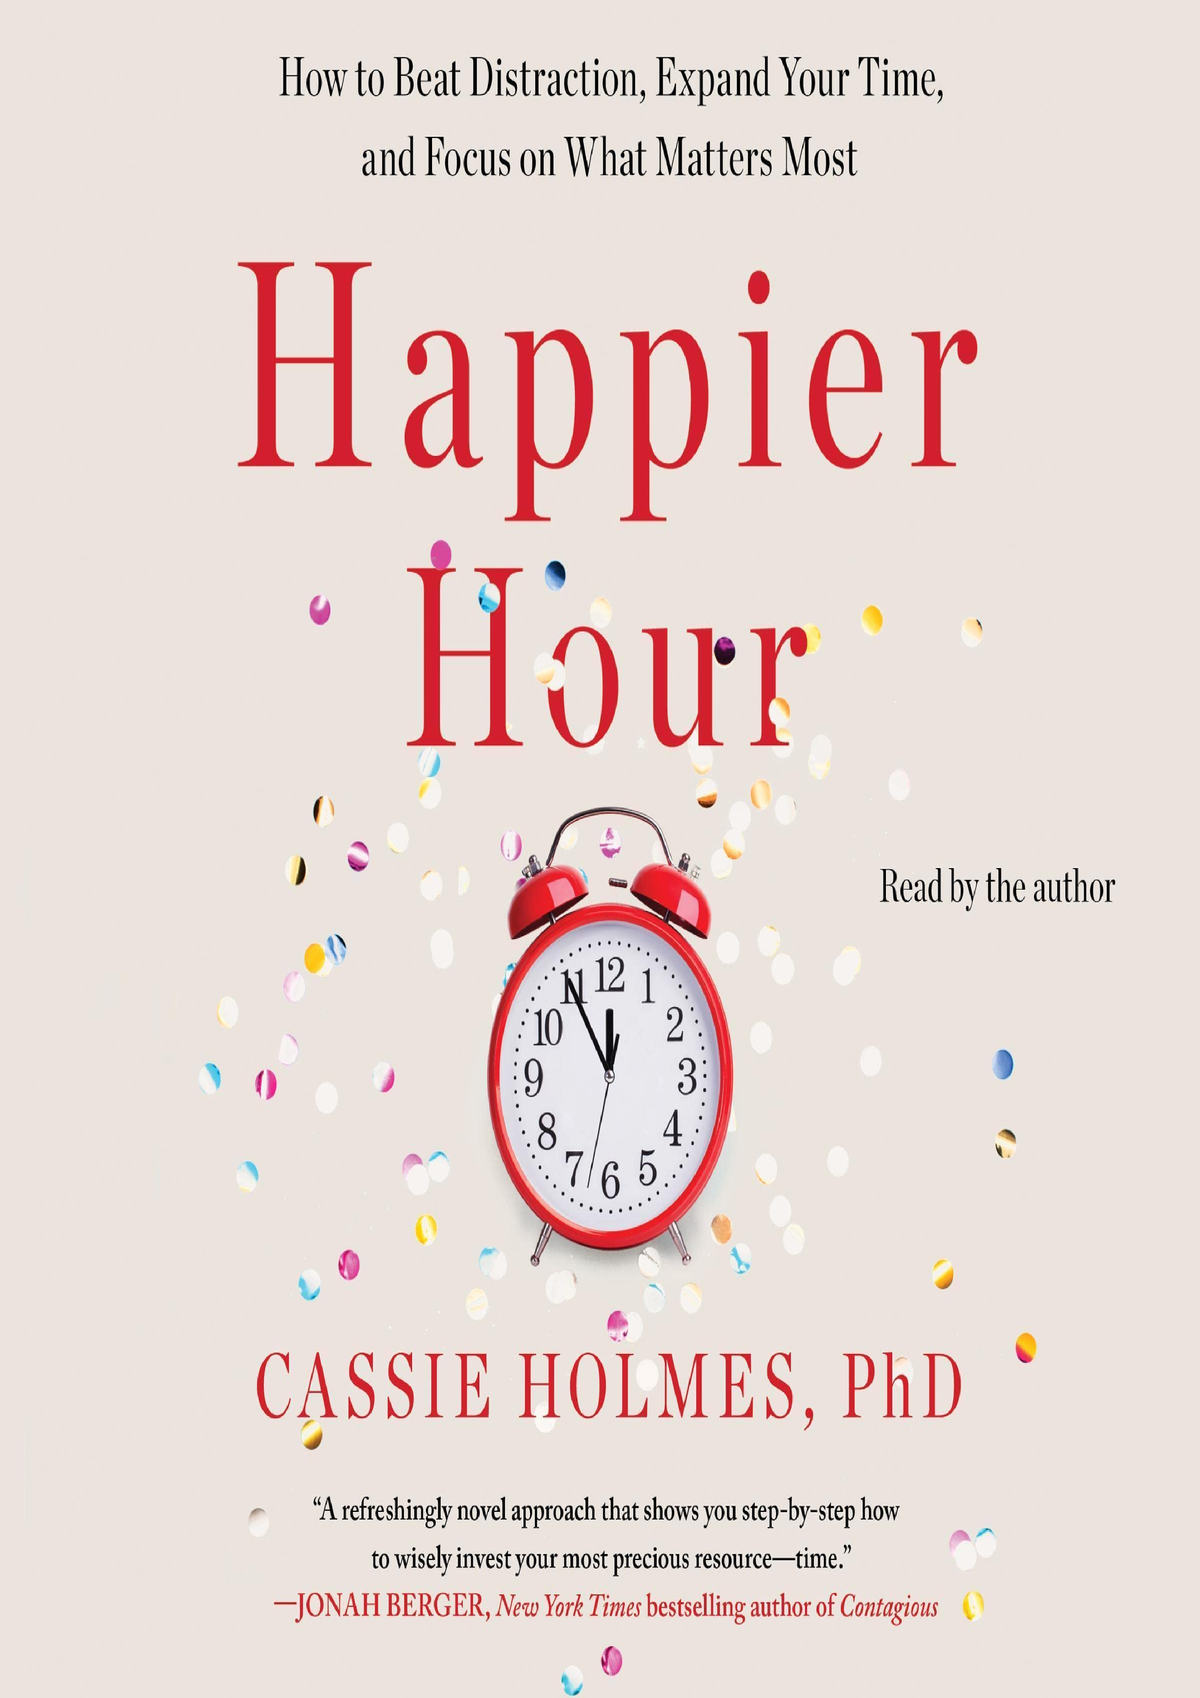 [Ebook] Happier Hour How to Beat Distraction, Expand Your Time, and